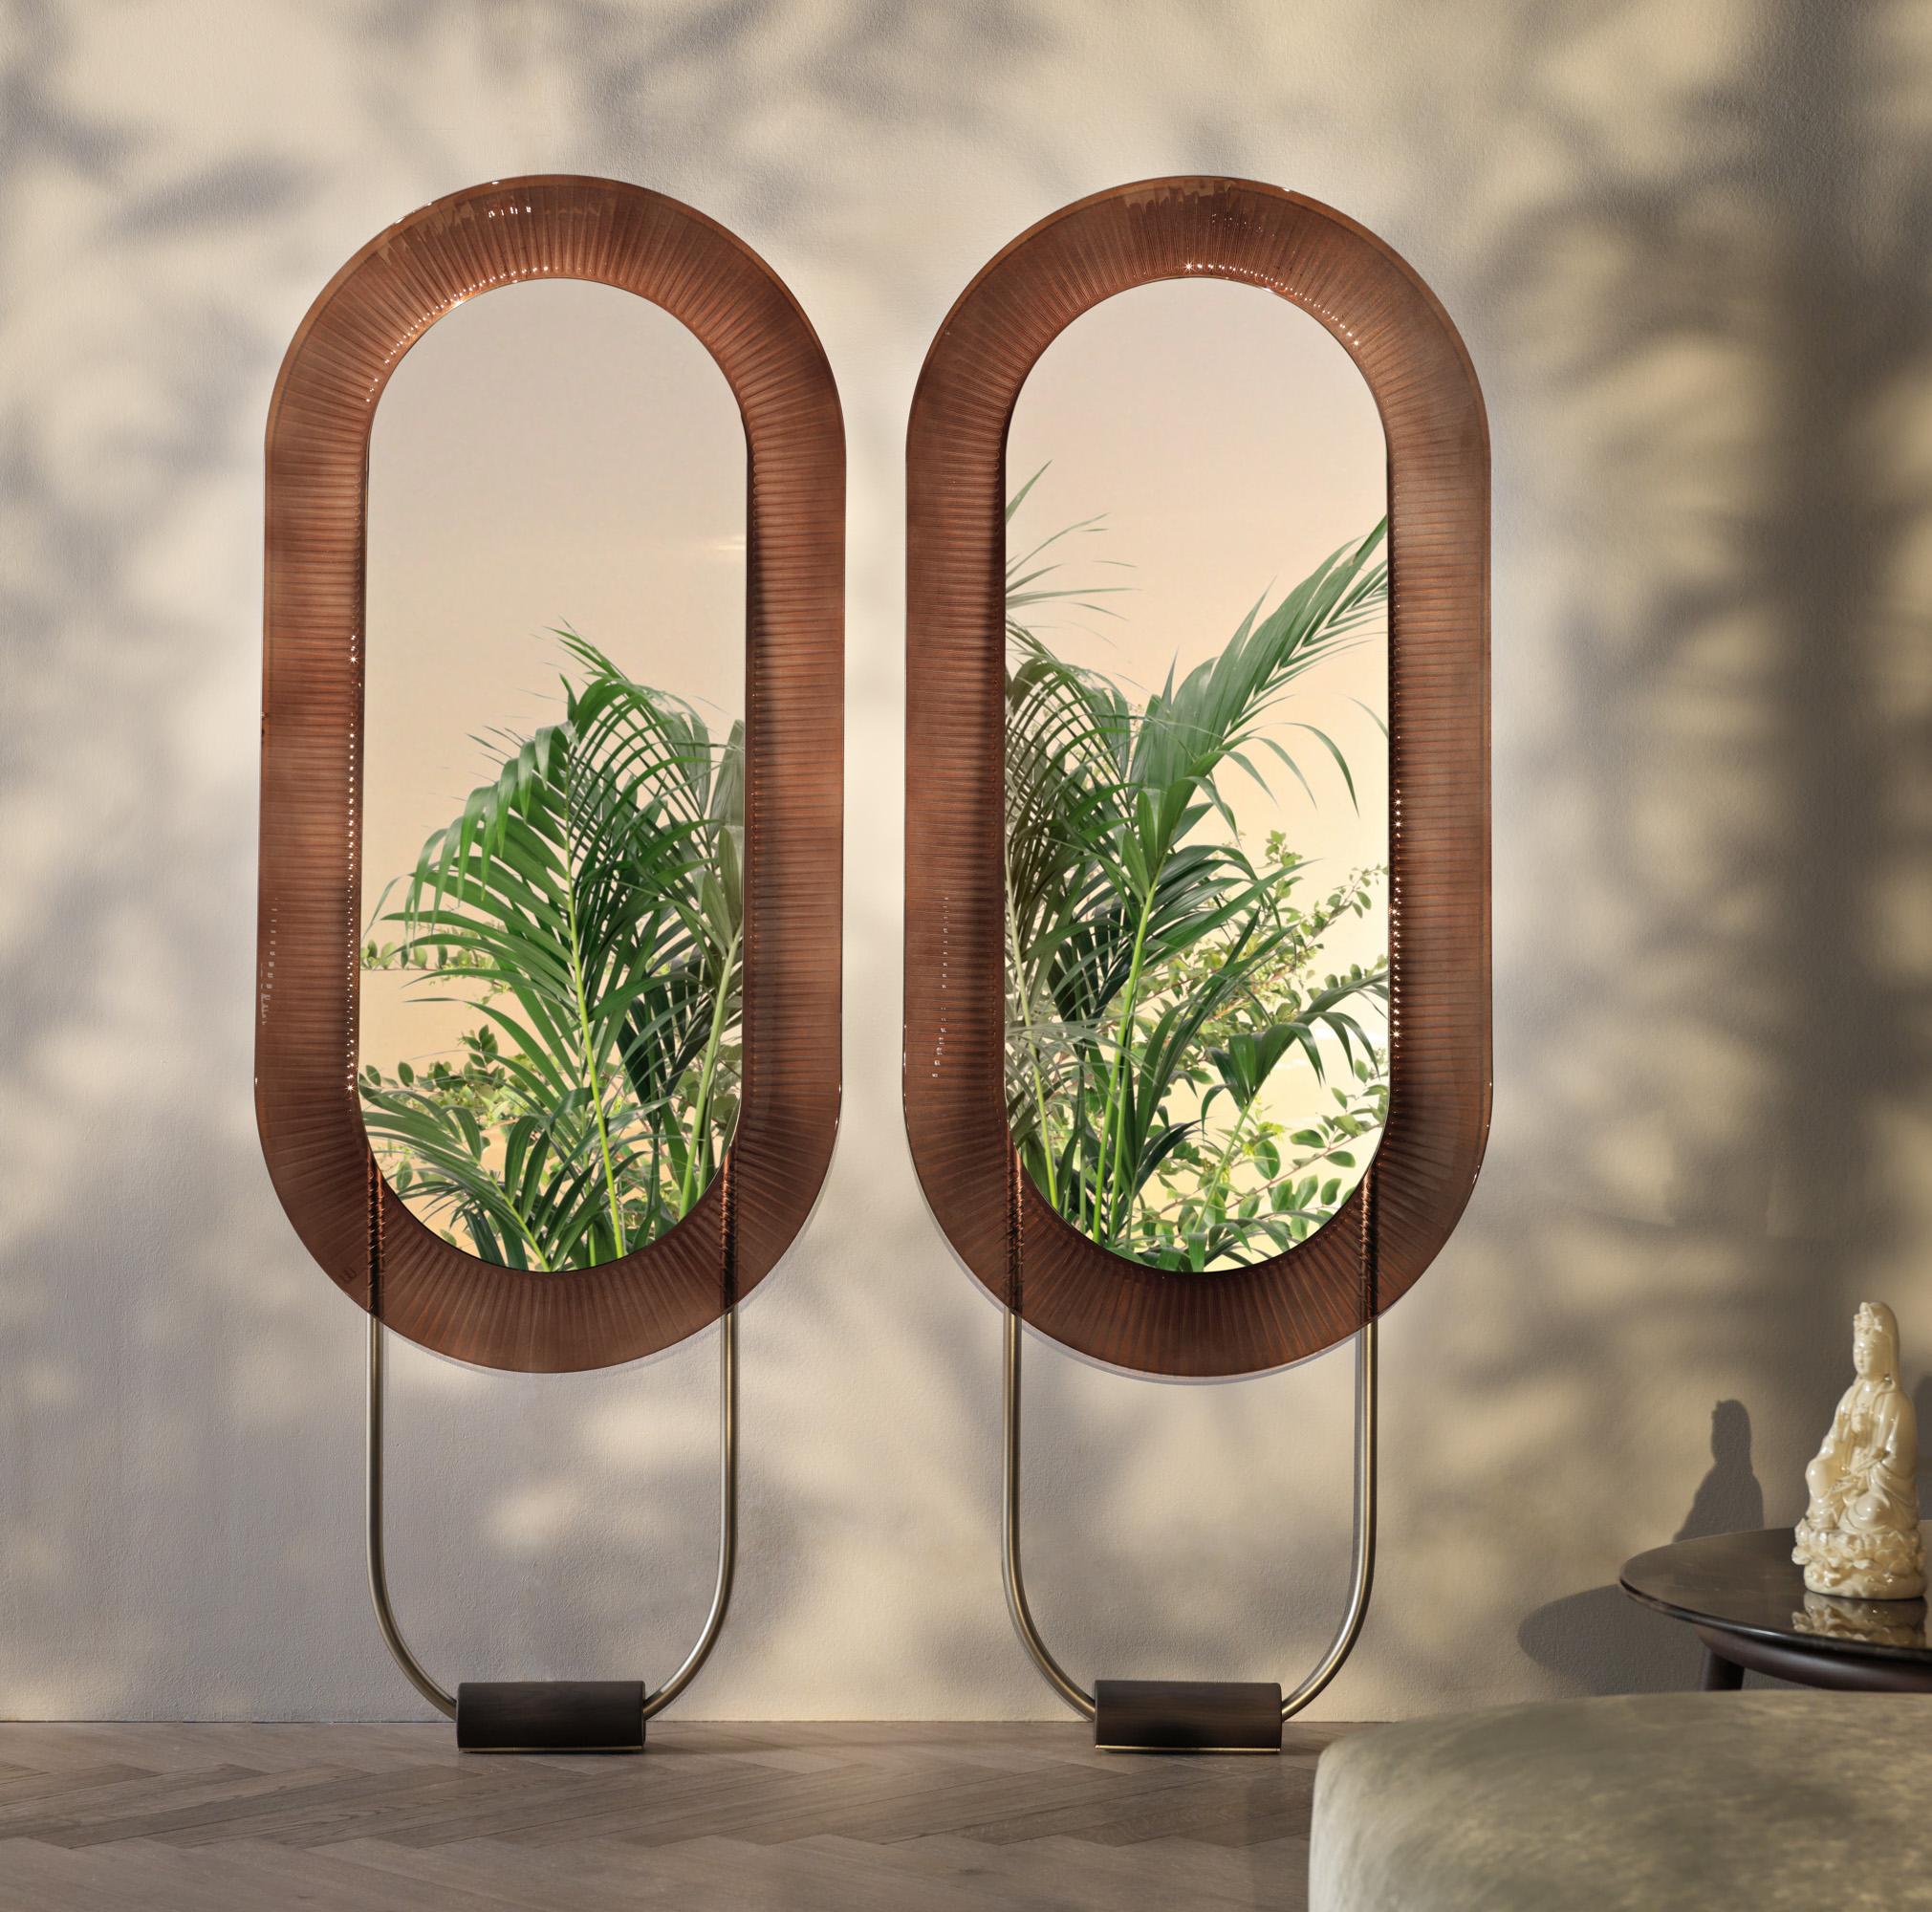 Contemporary Fiam Italia Kathleen  Round Mirror with Metal Frame by Davide Oppizzi For Sale